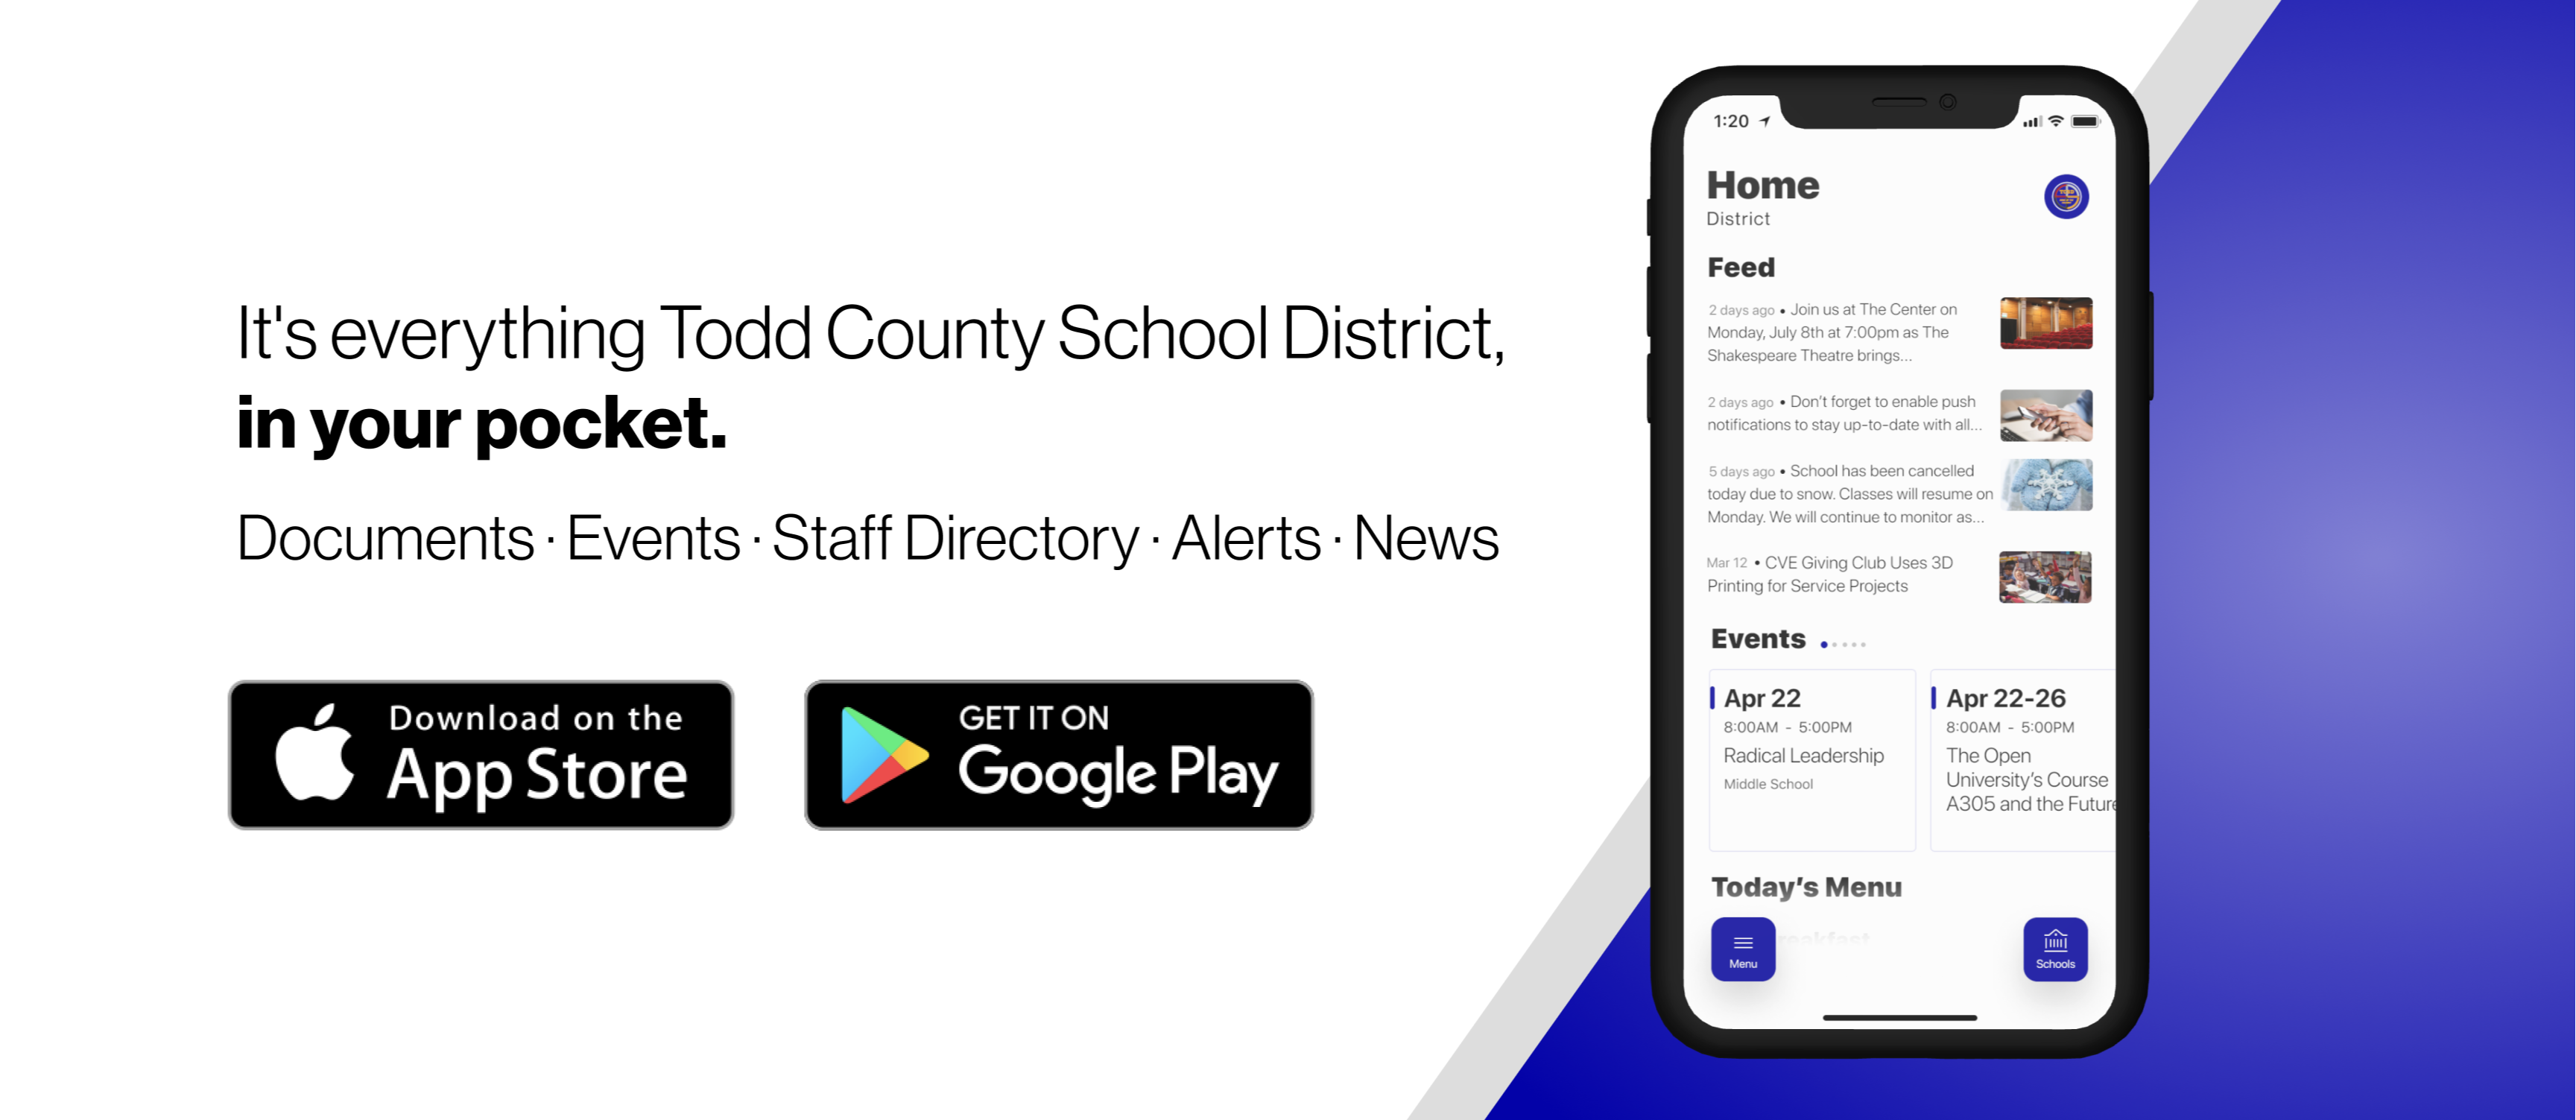 "it's everything todd county school distrcit in your pocket. image of open app